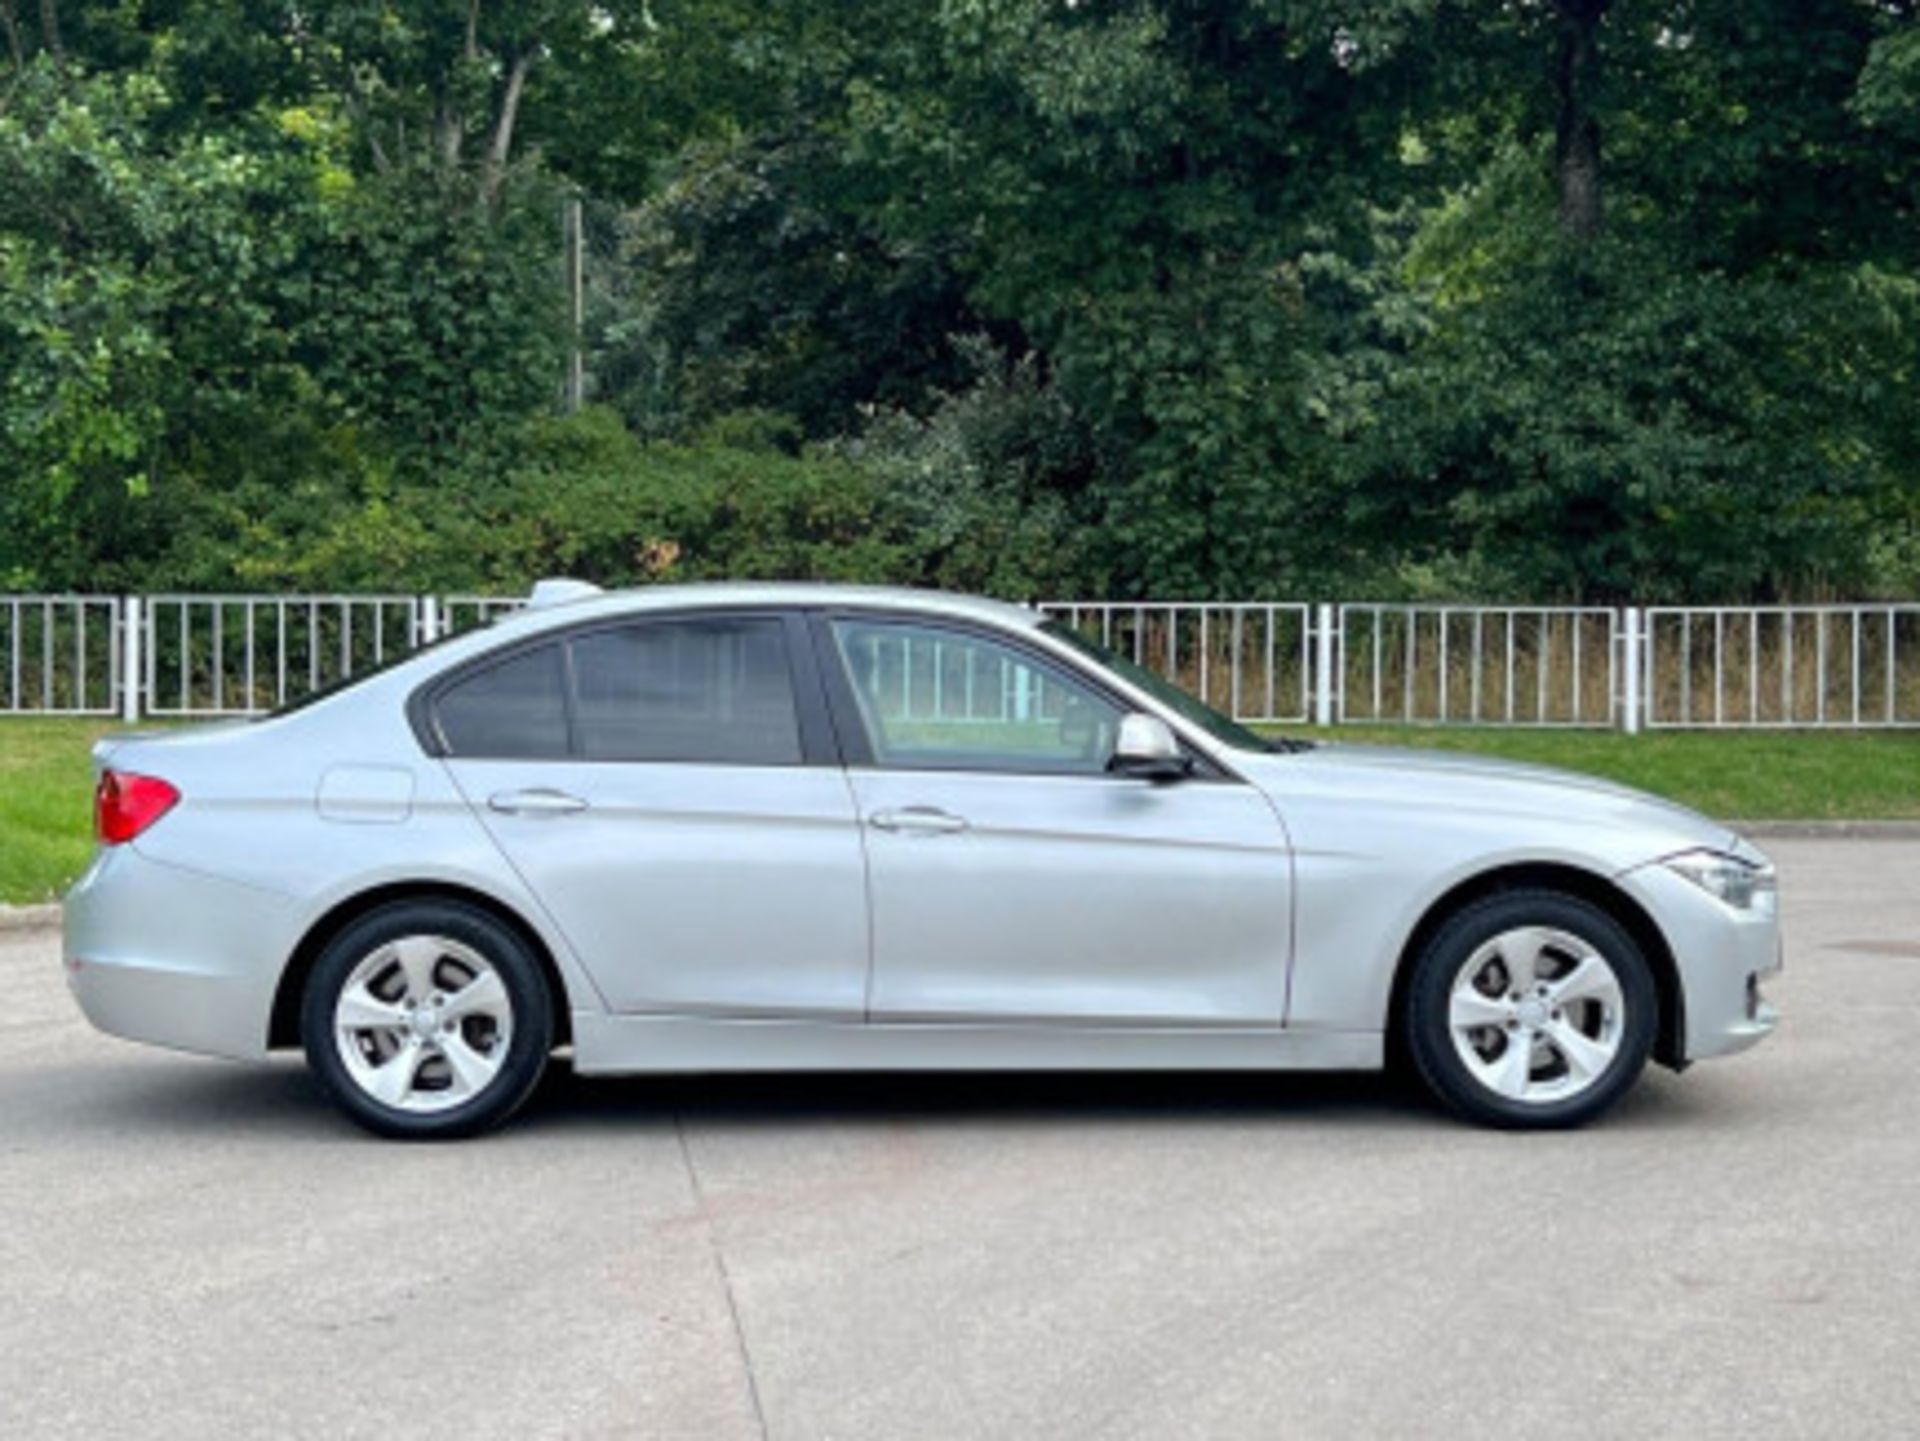 BMW 3 SERIES 2.0 DIESEL ED START STOP - A WELL-MAINTAINED GEM >>--NO VAT ON HAMMER--<< - Image 125 of 229